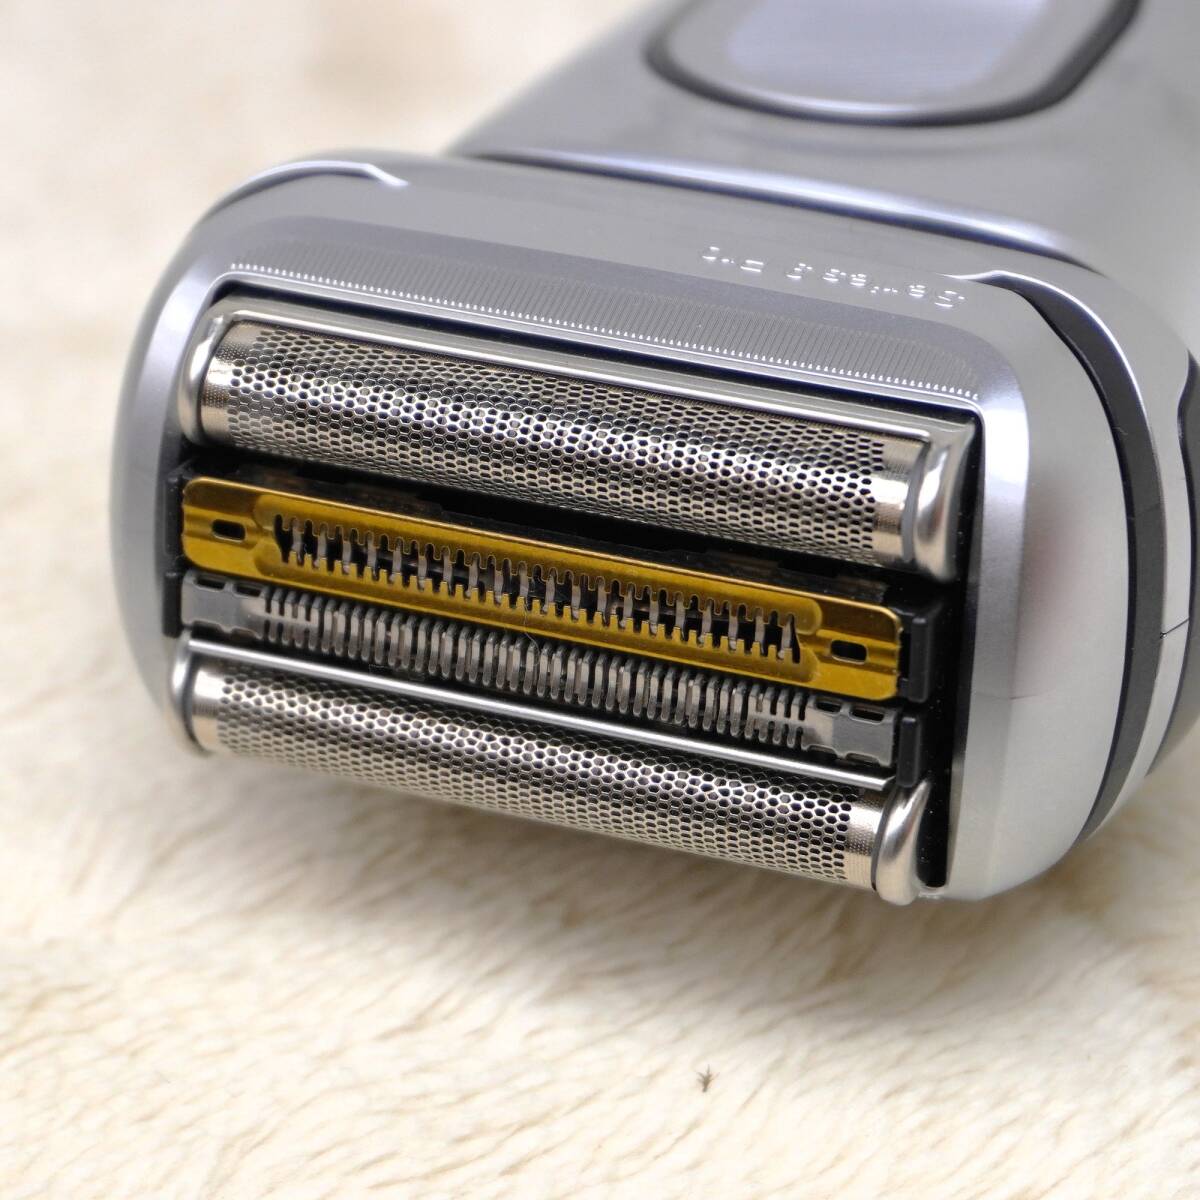 **[ unused ] Brown series 9 Pro electric shaver [ charge travel case attaching ] Type5793 (^^!! ($X7)